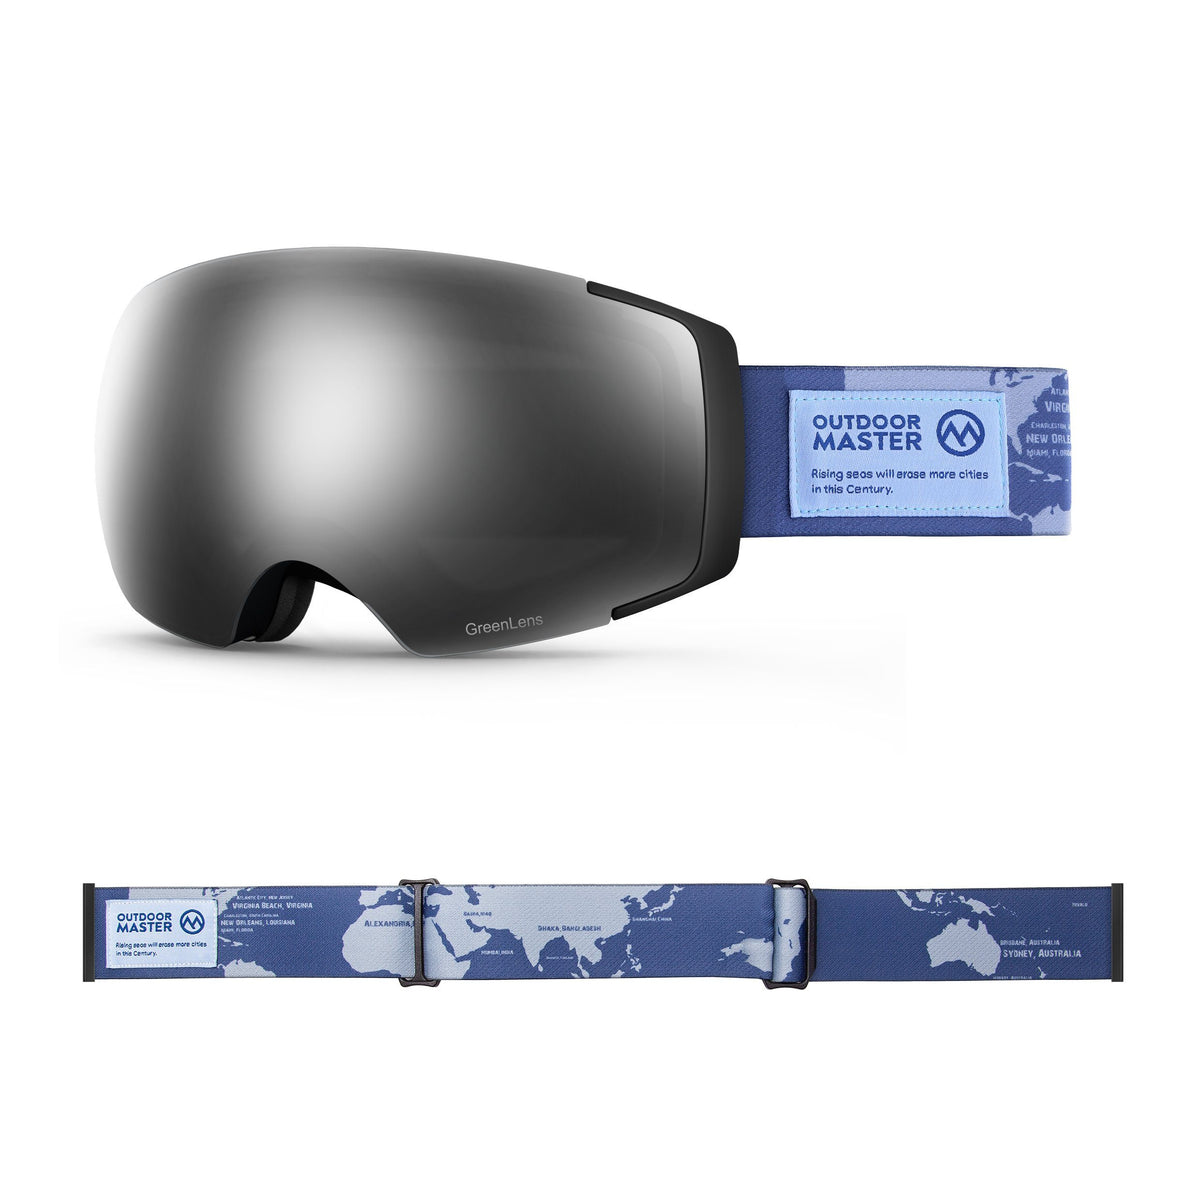 Eco-friendly Ski Goggles Pro Series - The Disappearing Places/Classic BambooStraps Limited Edition OutdoorMaster GreenLens VLT 10% TAC Grey With REVO Silver Polarized The Disappearing Places